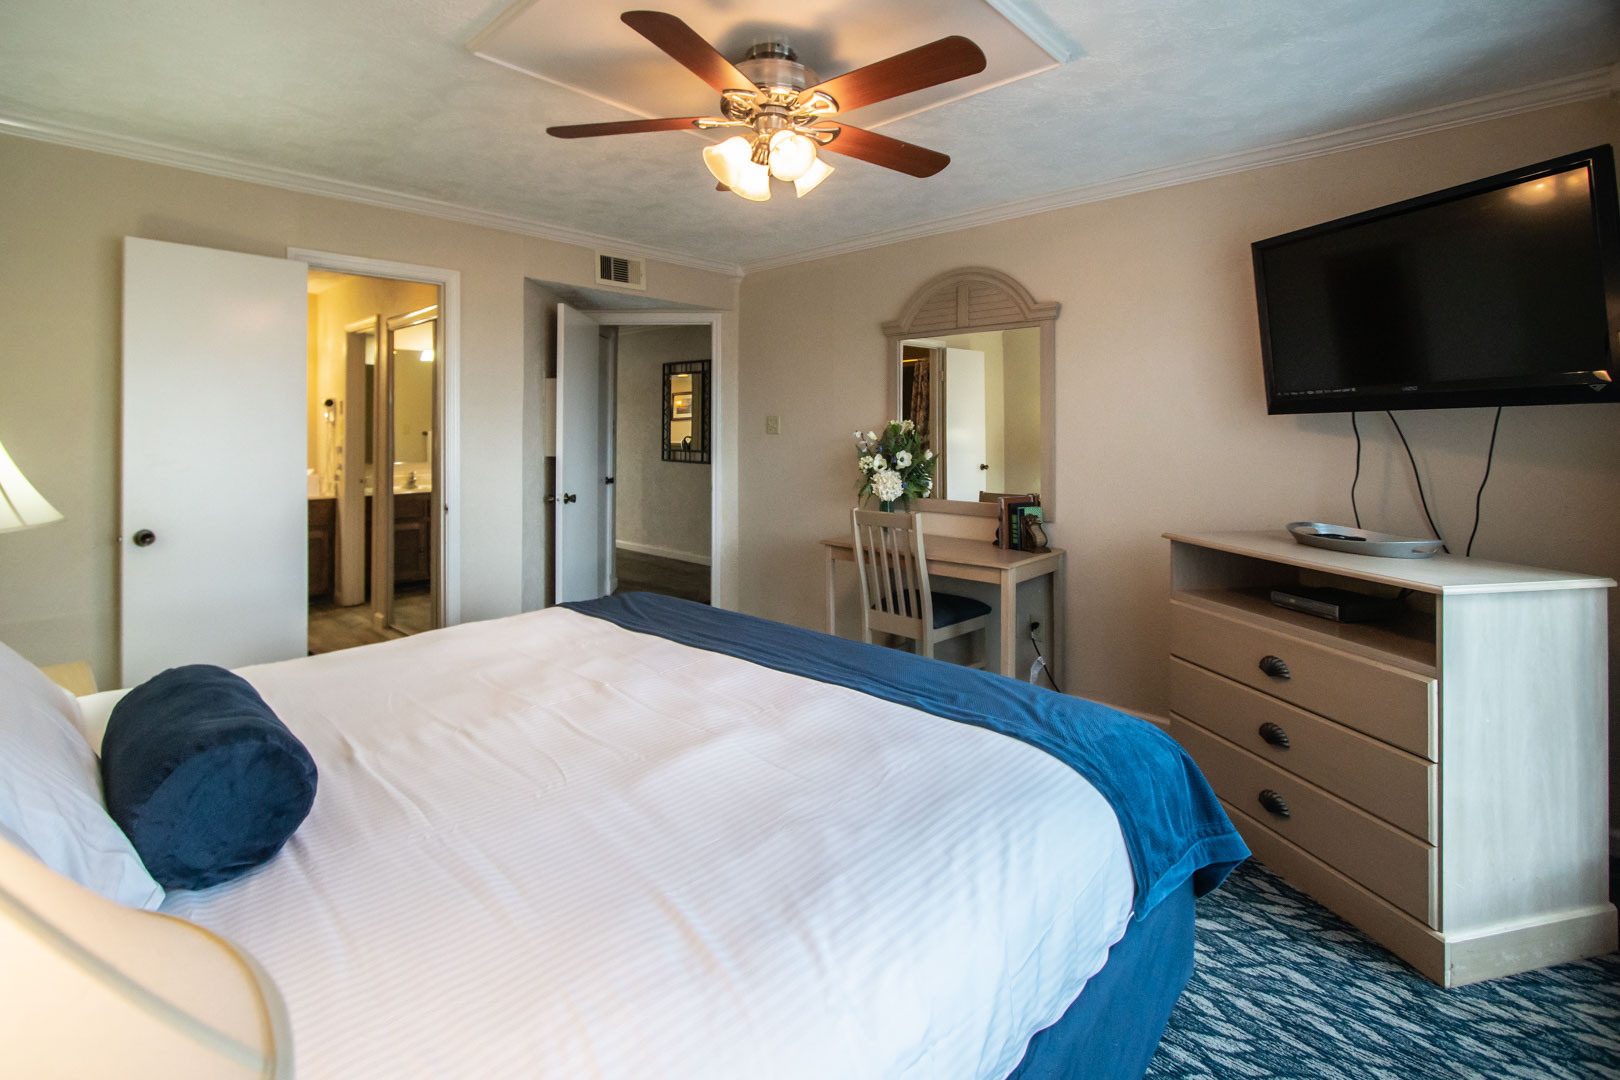 A spacious master bedroom at VRI's The Landing at Seven Coves in Willis, Texas.